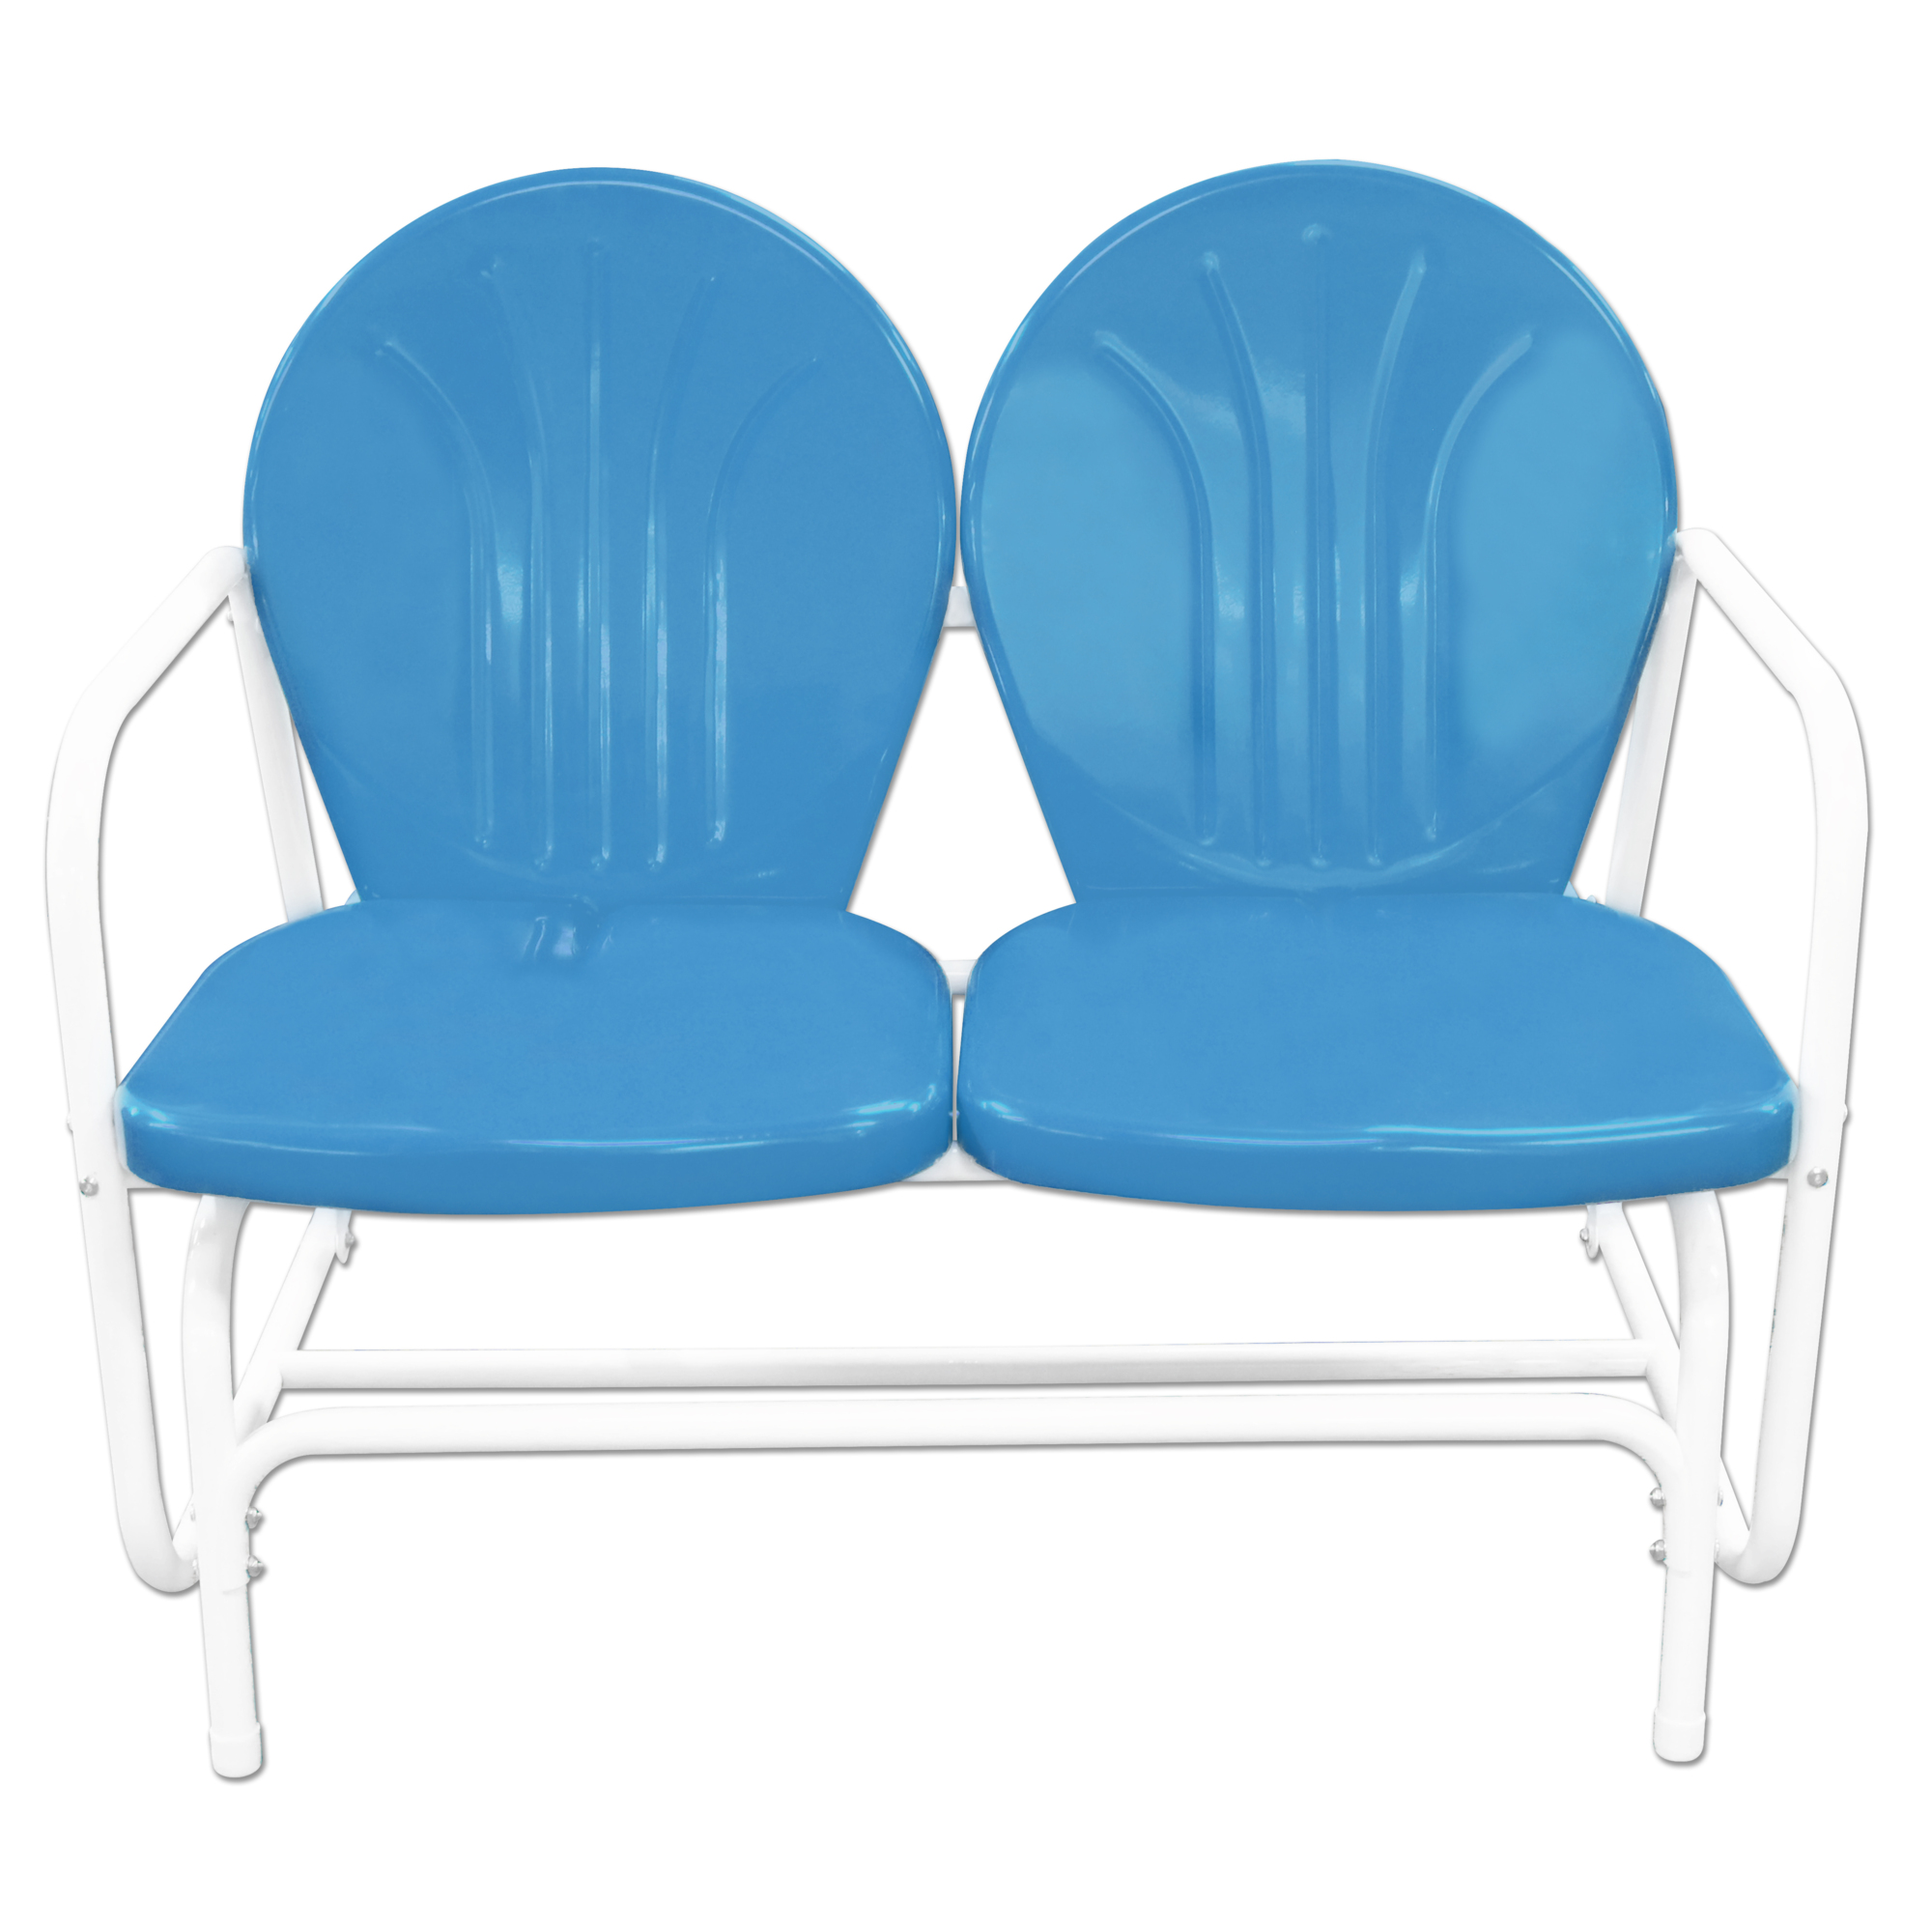 Leigh Country, Retro Double Glider Azure White, Primary Color Blue, Material Metal, Width 23.62 in, Model TX 93515